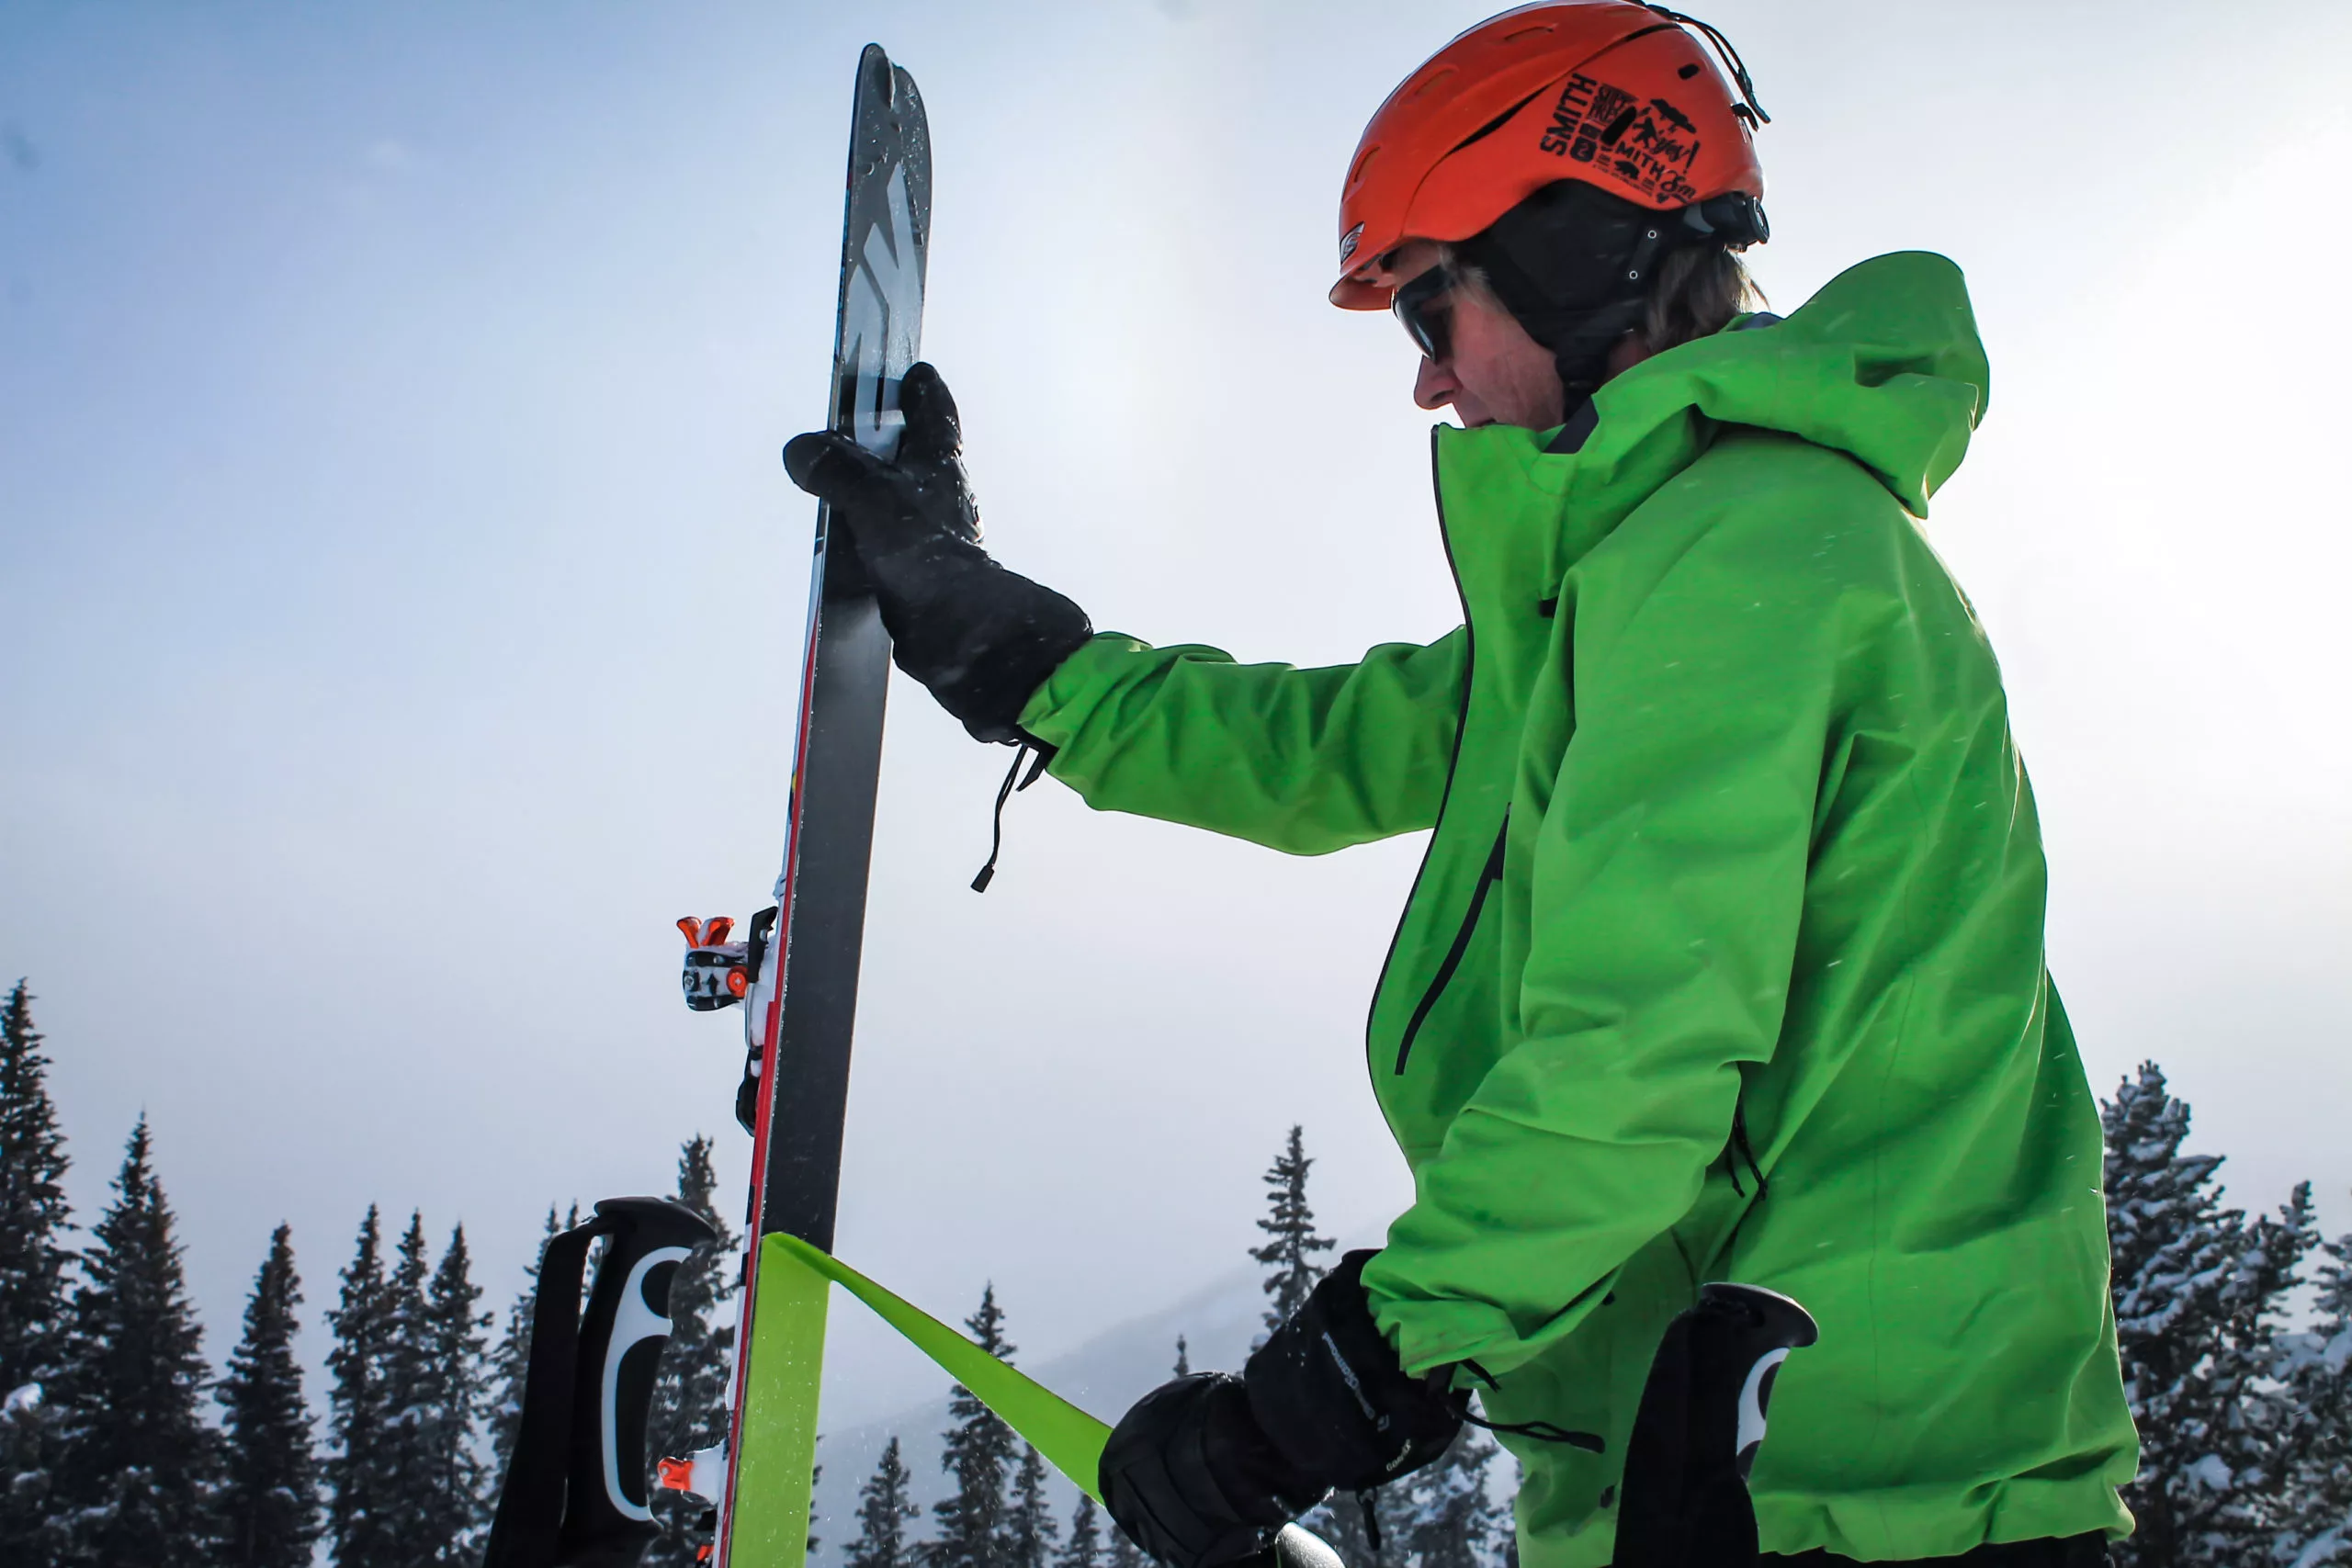 Removing skins for backcountry skiing